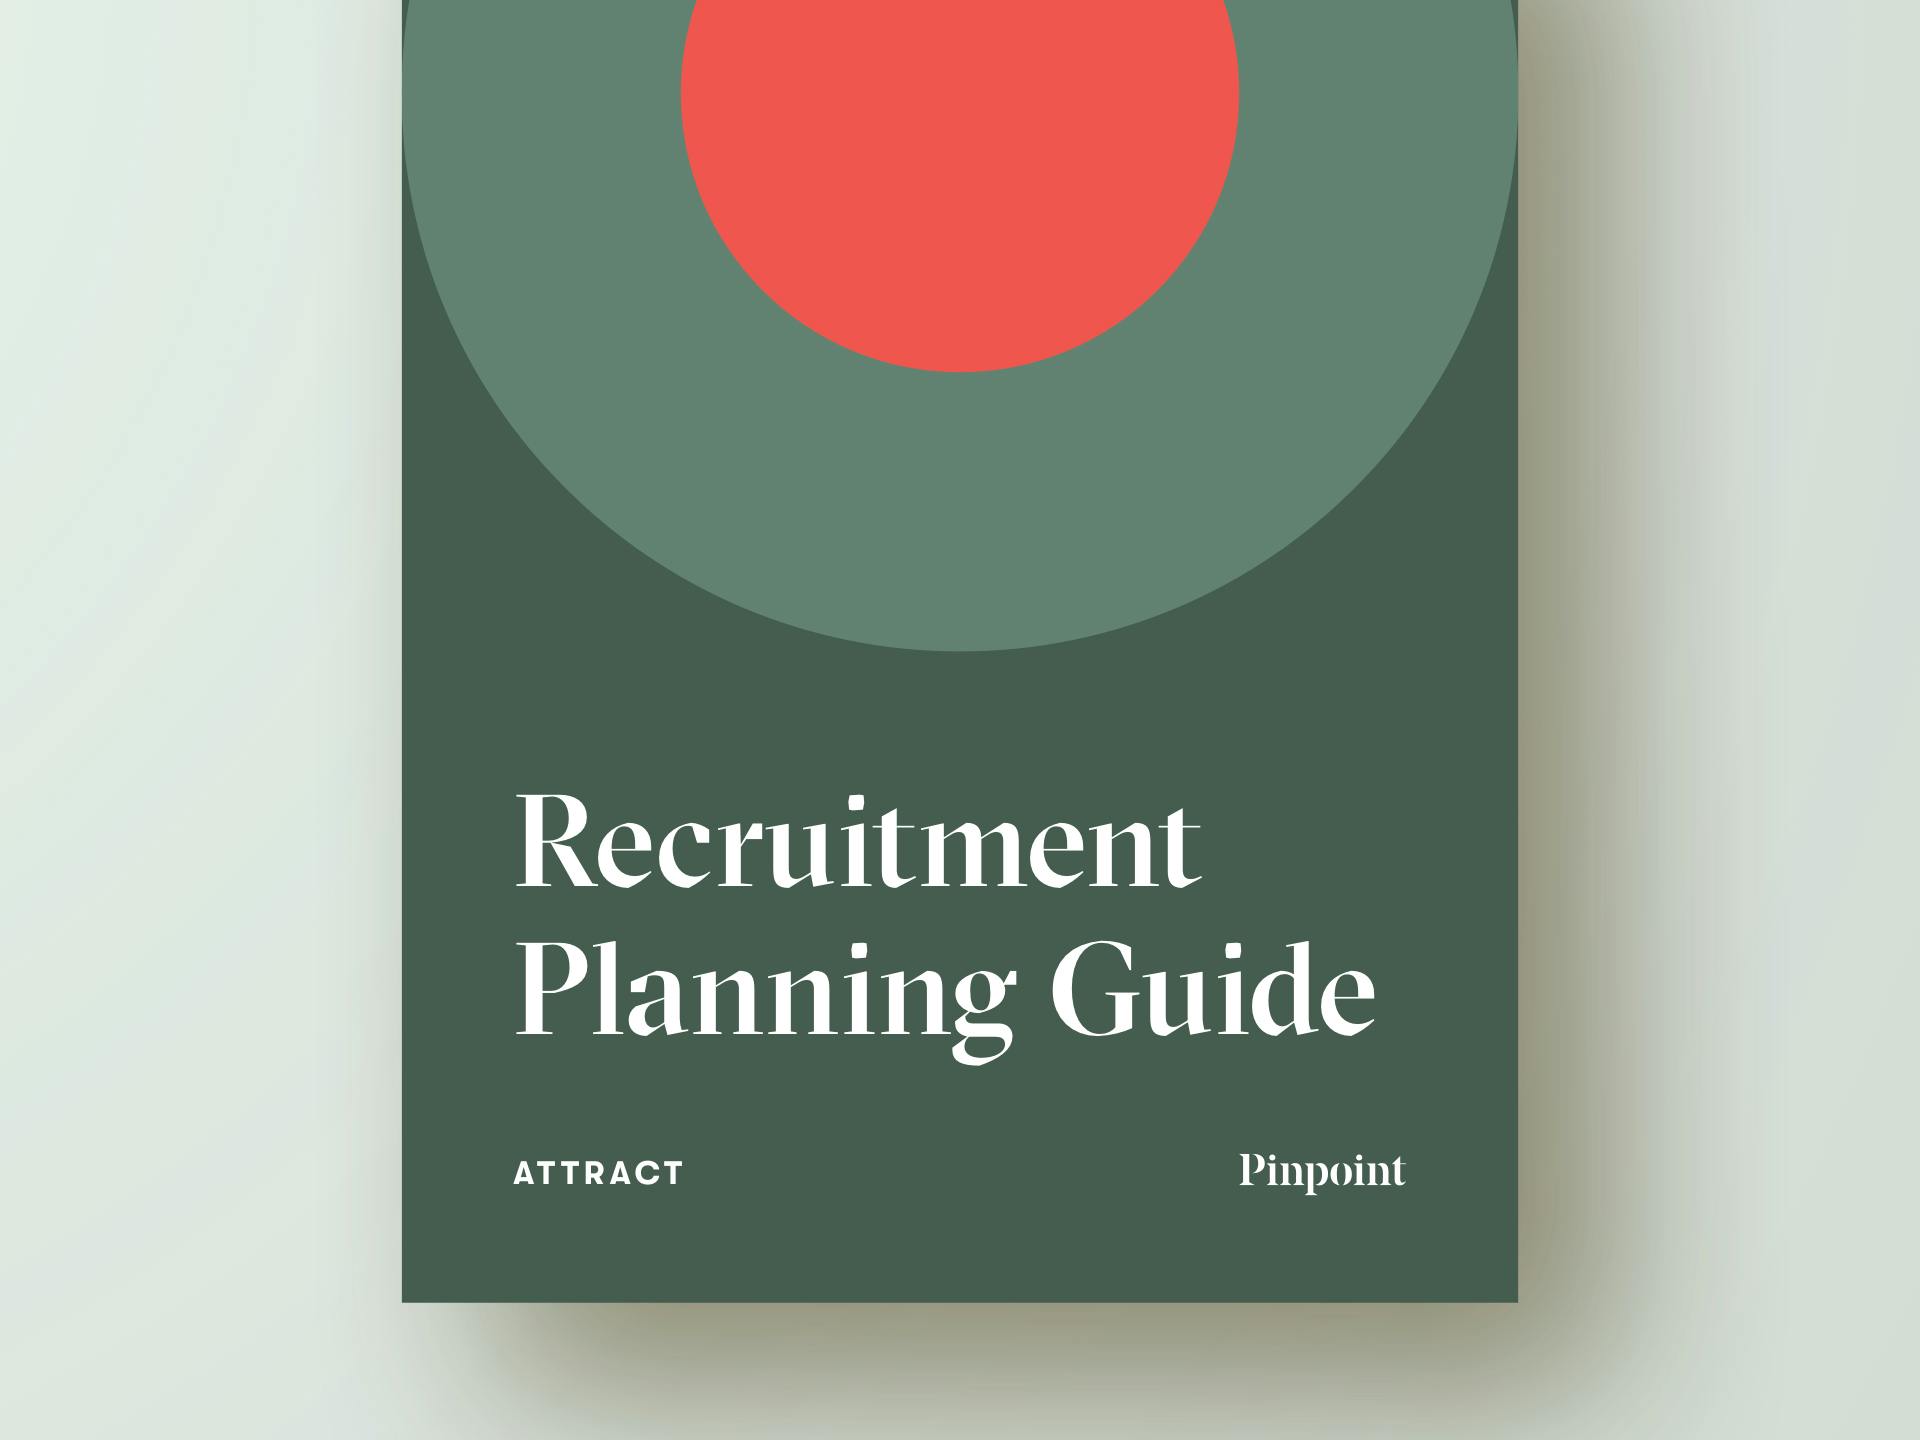 How to build a recruitment plan